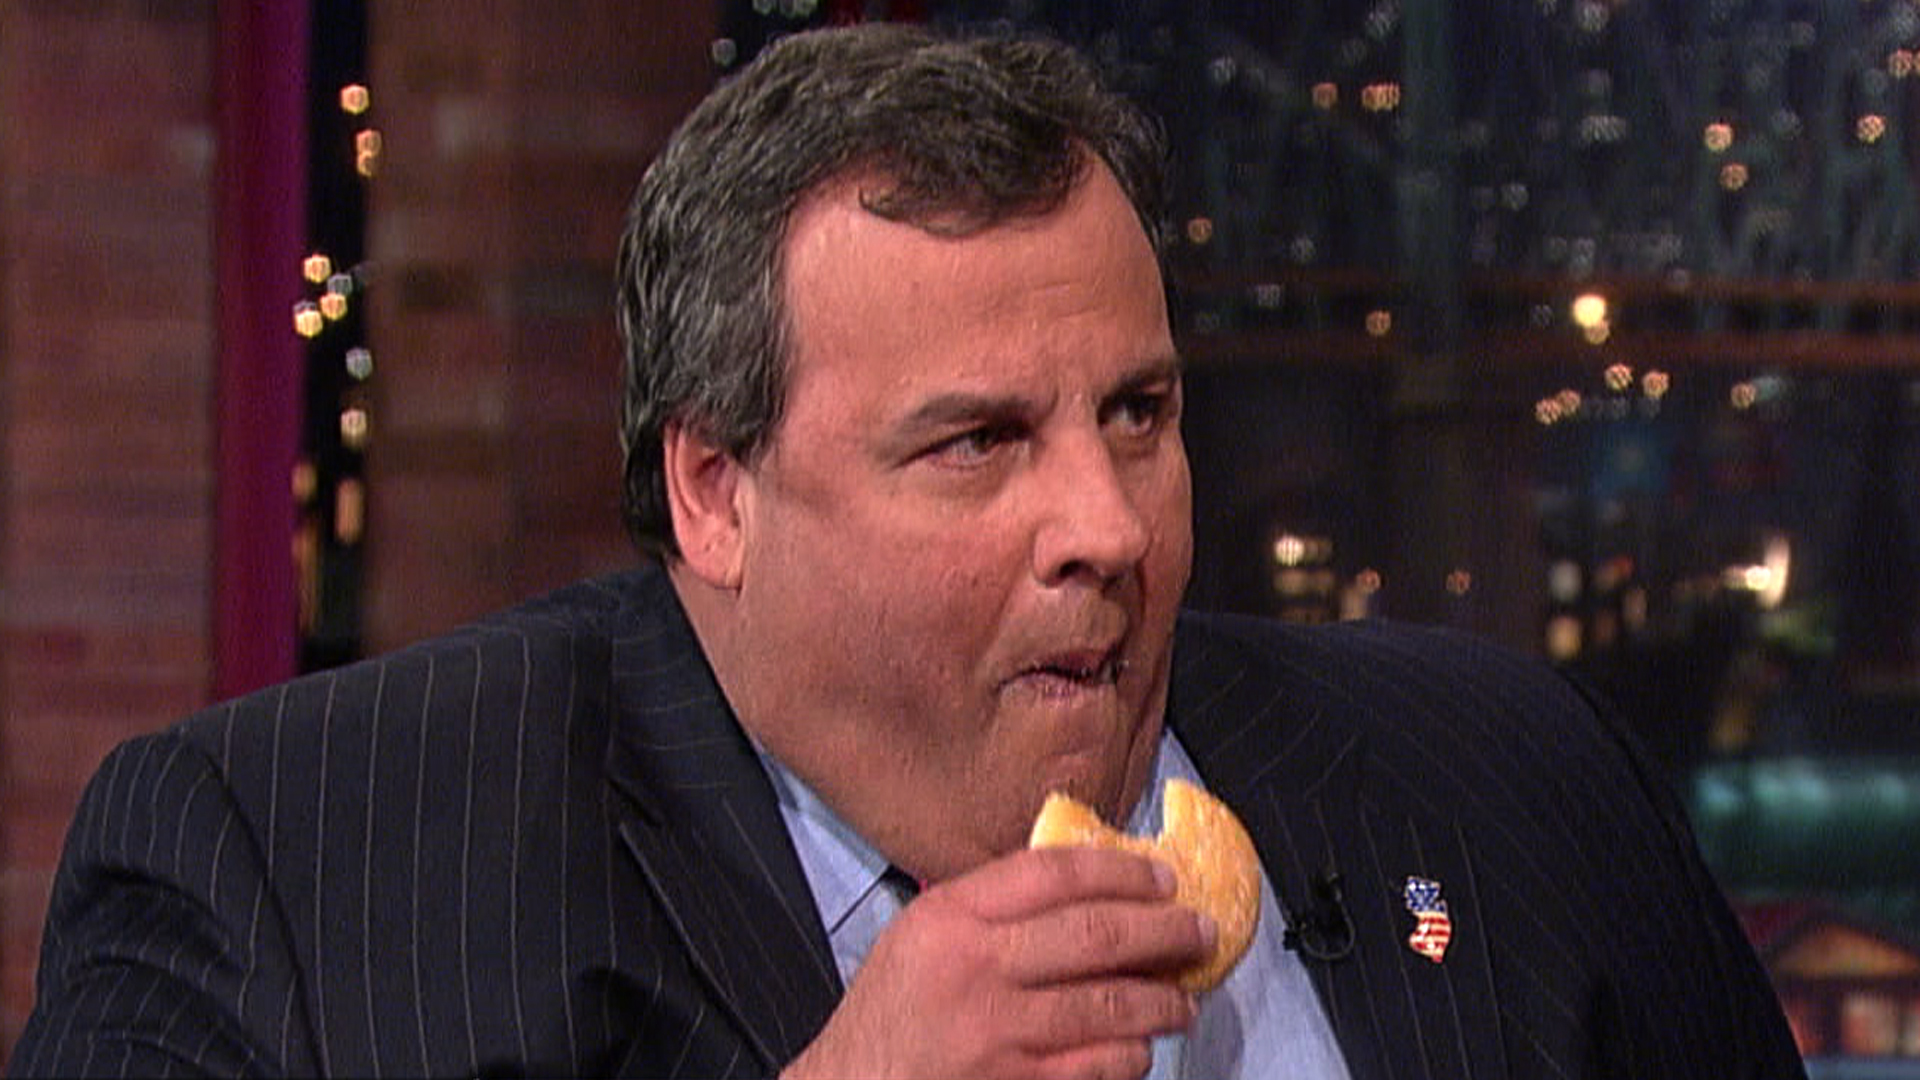 Chris Christie on weight loss "There is a plan" CBS News